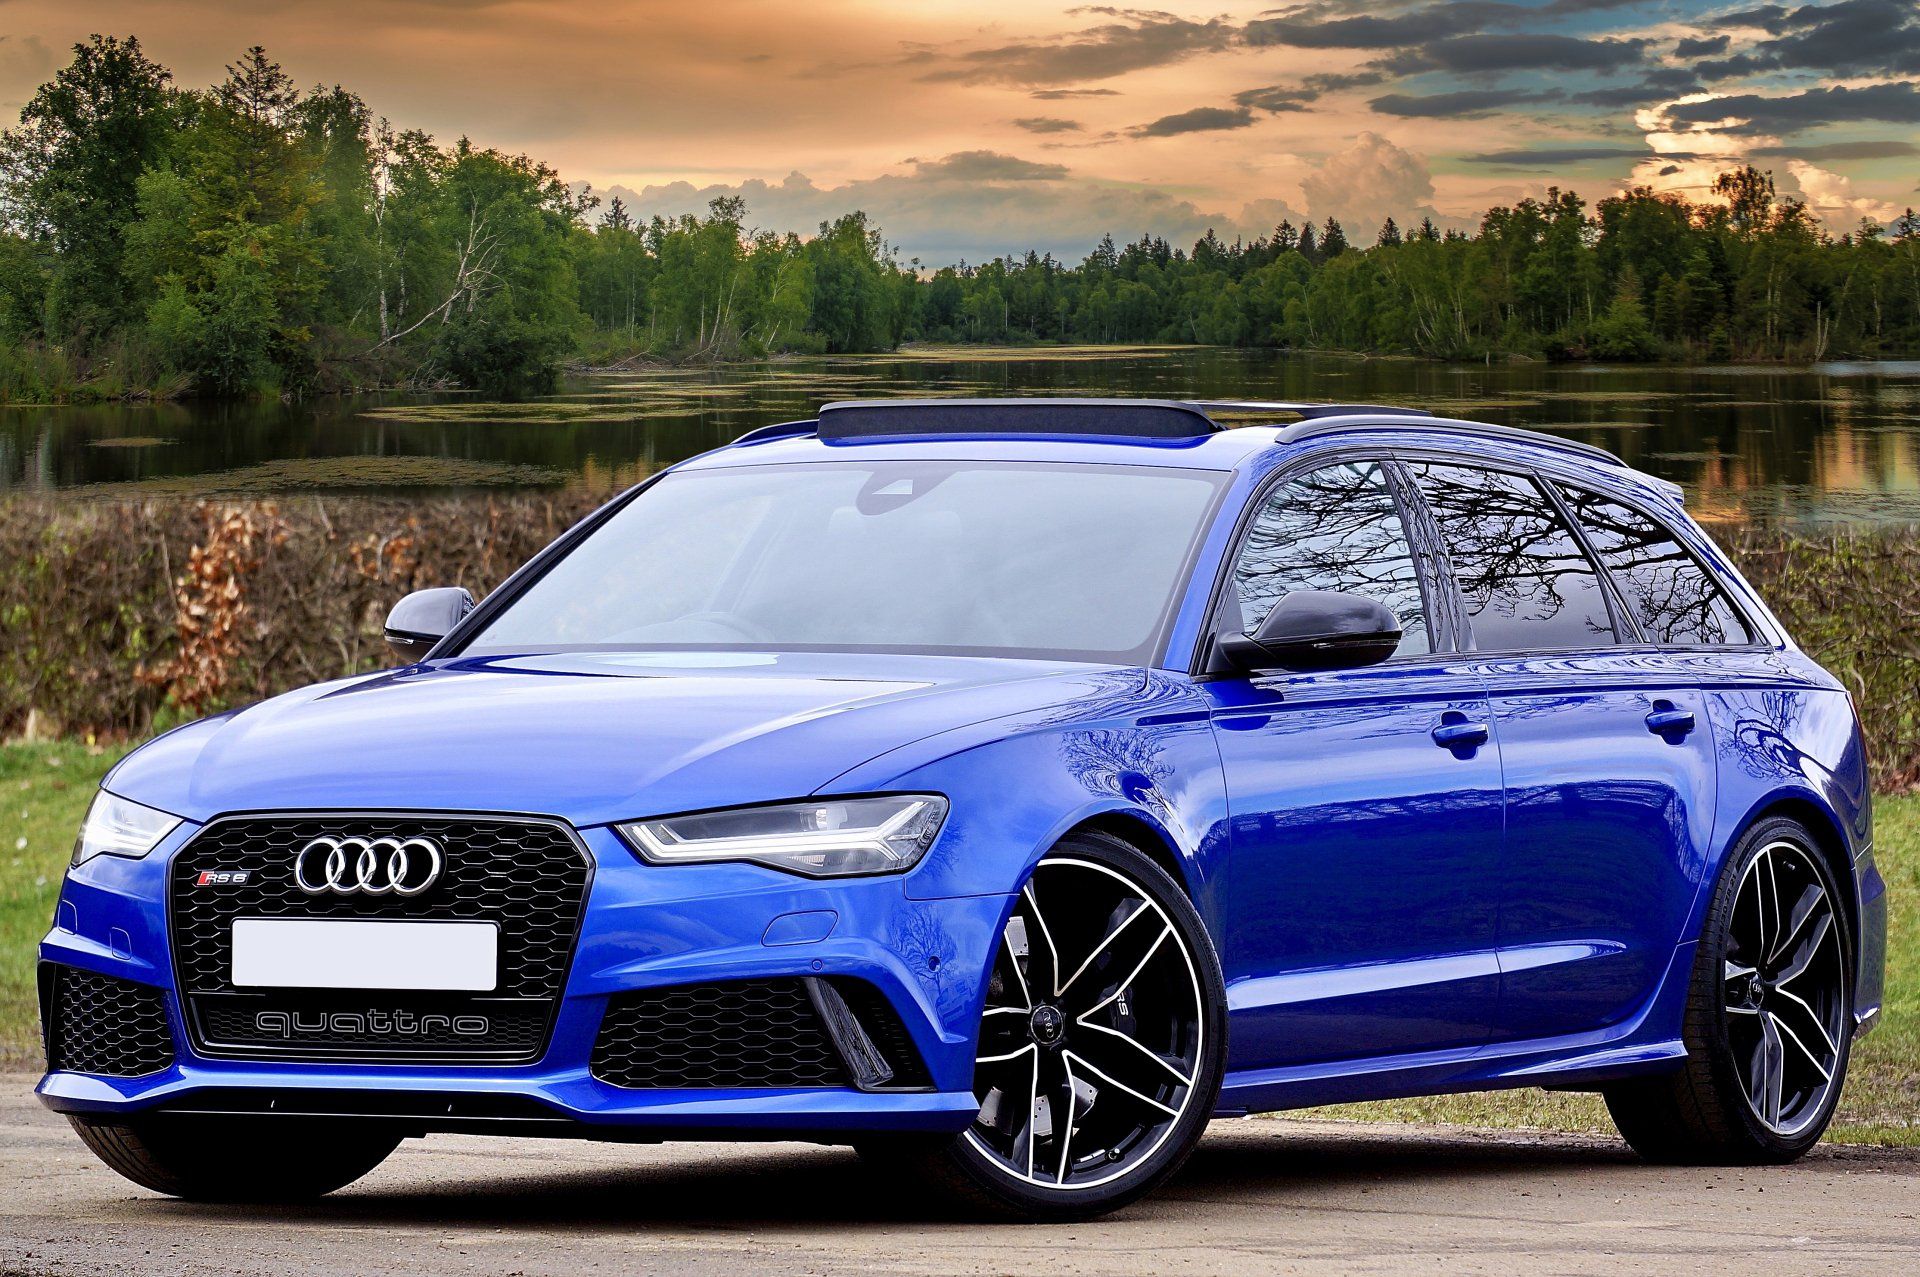 A blue audi rs6 is parked in front of a lake.